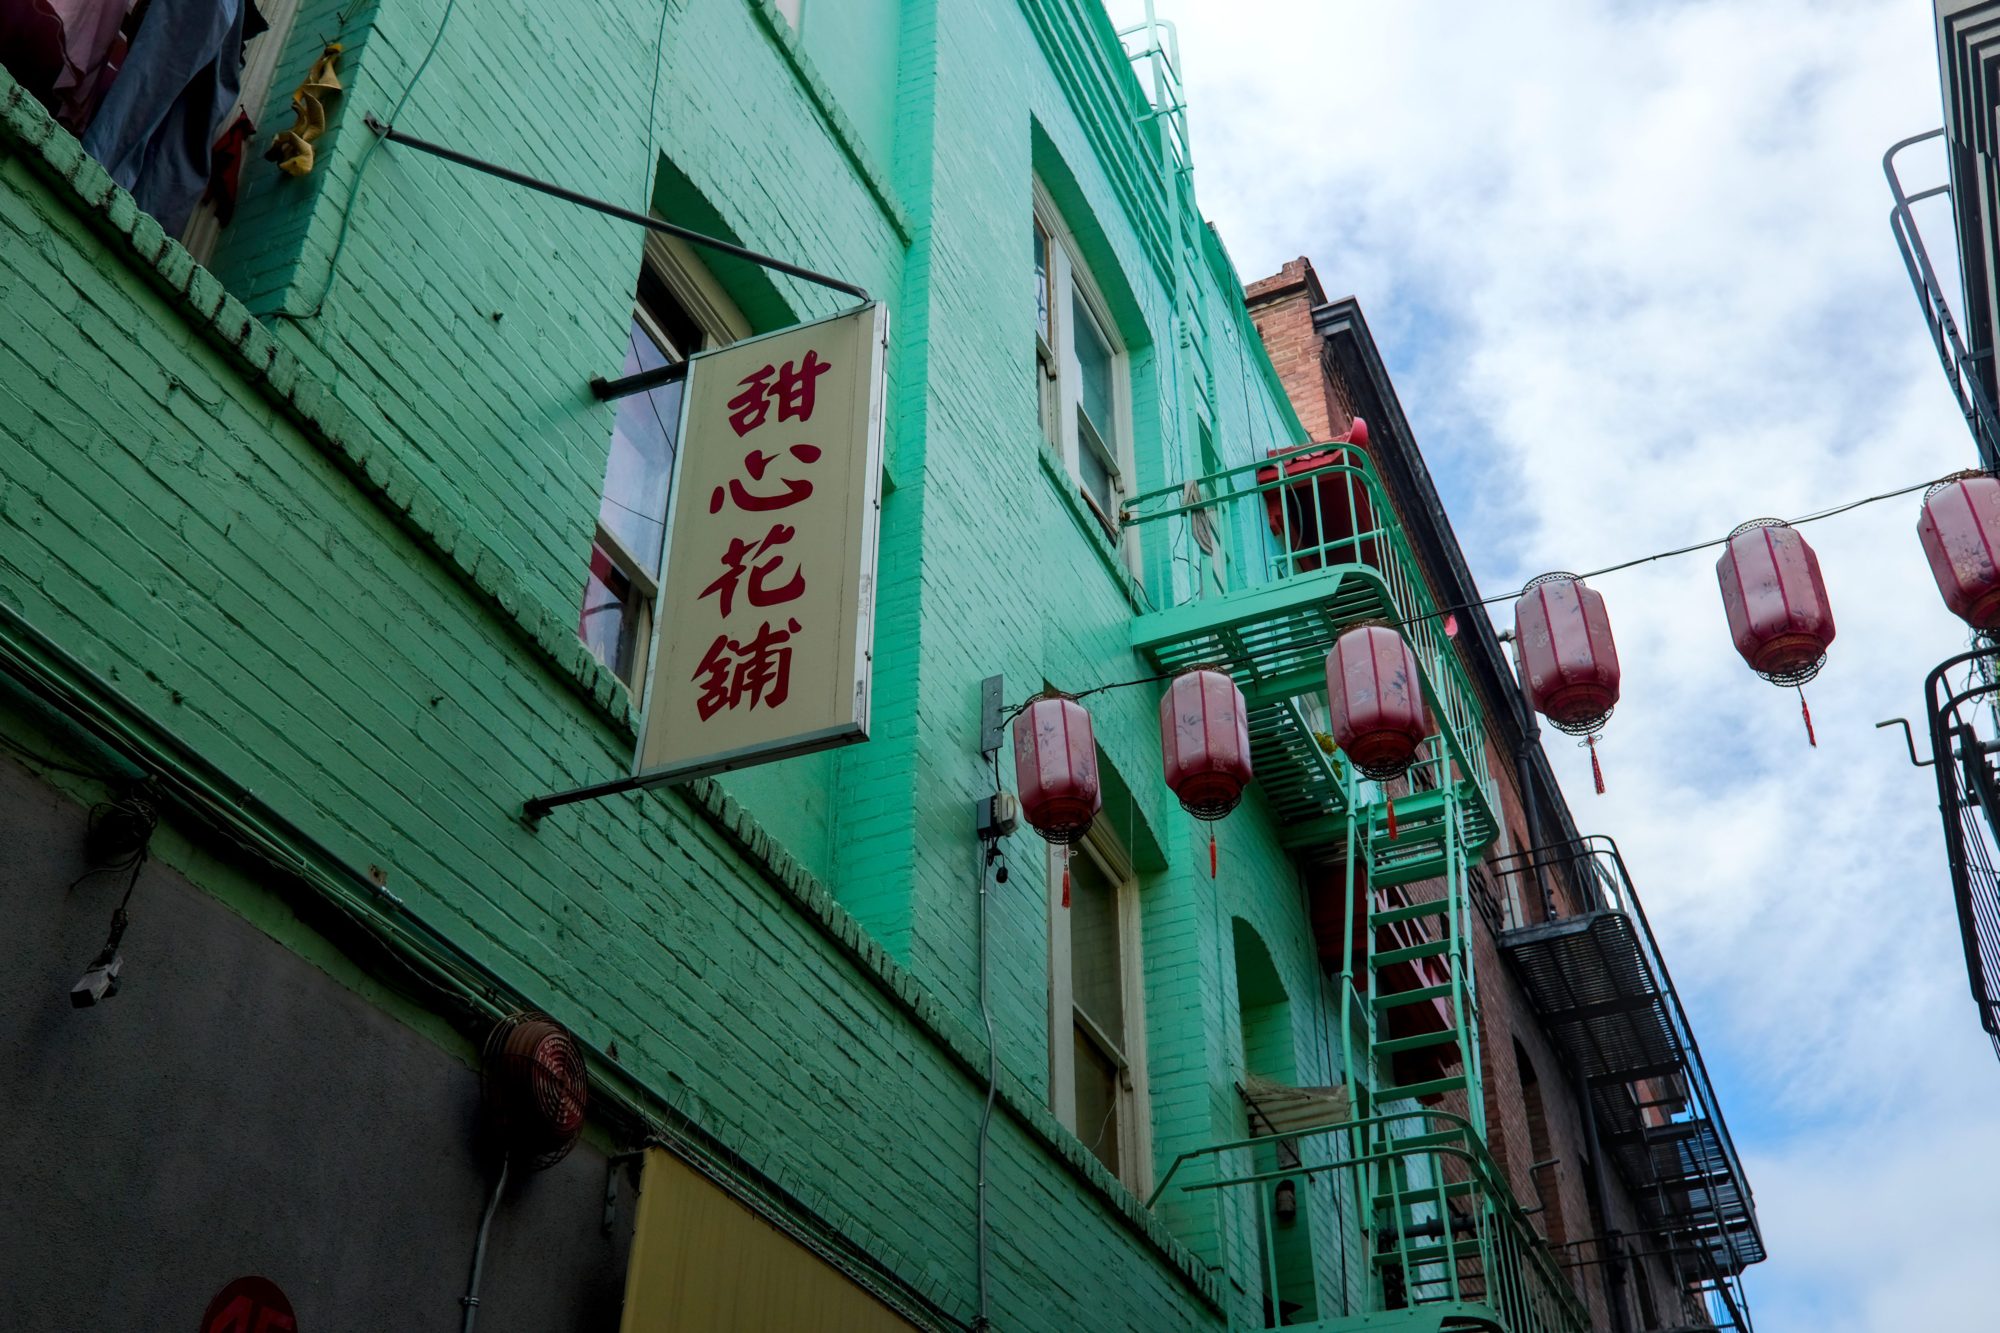 The Sweetheart Flower Shop in San Francisco's Chinatown